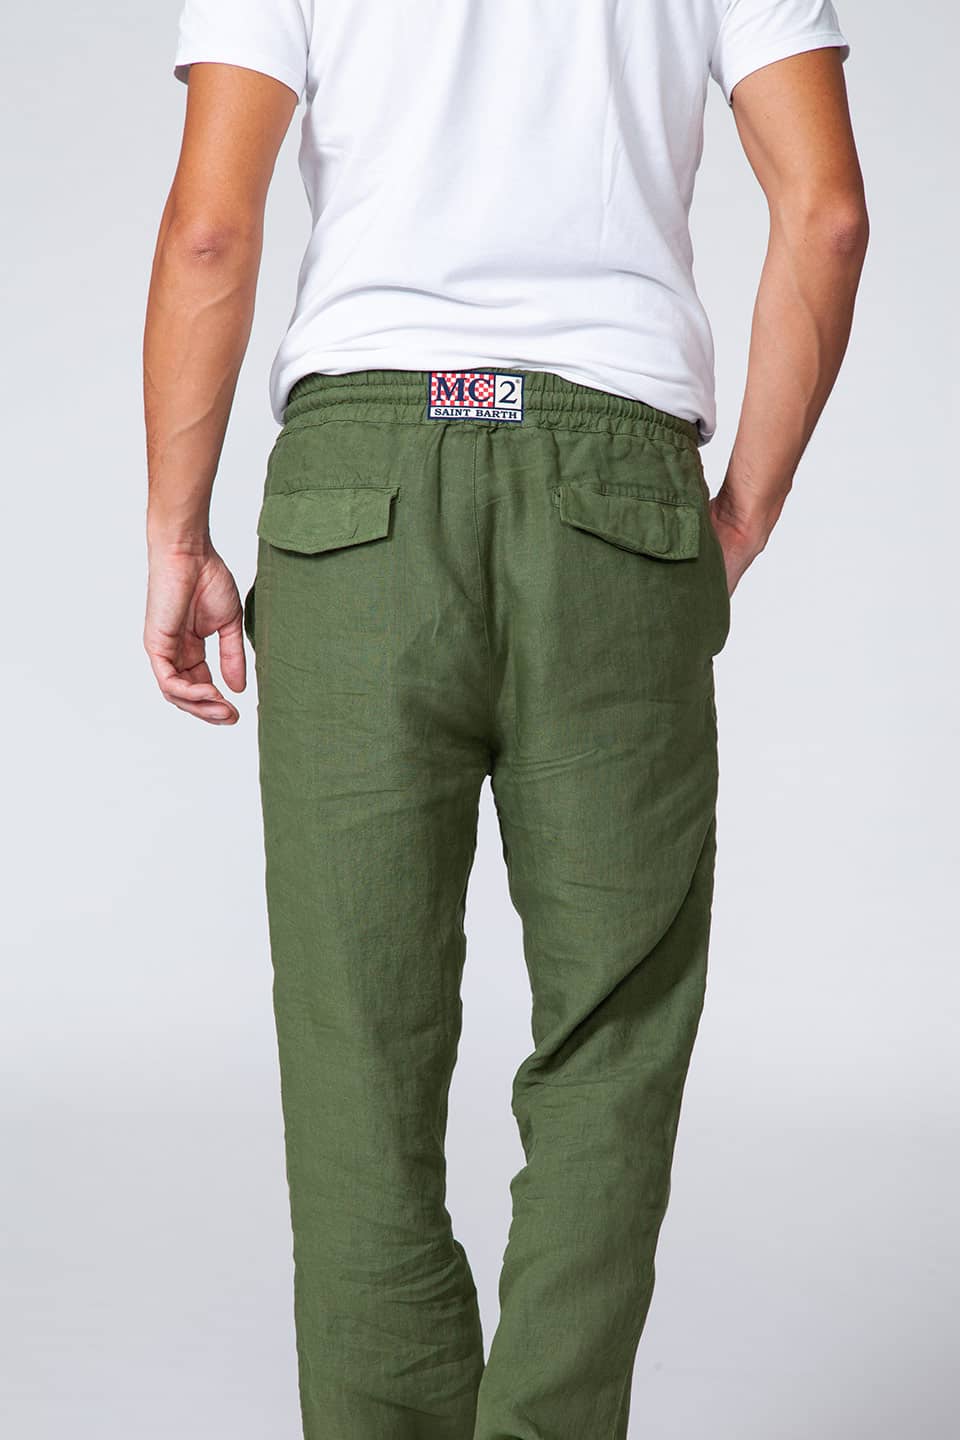 Man linen trousers in military green color from Italian brand MC2 Saint Barth, back pockets